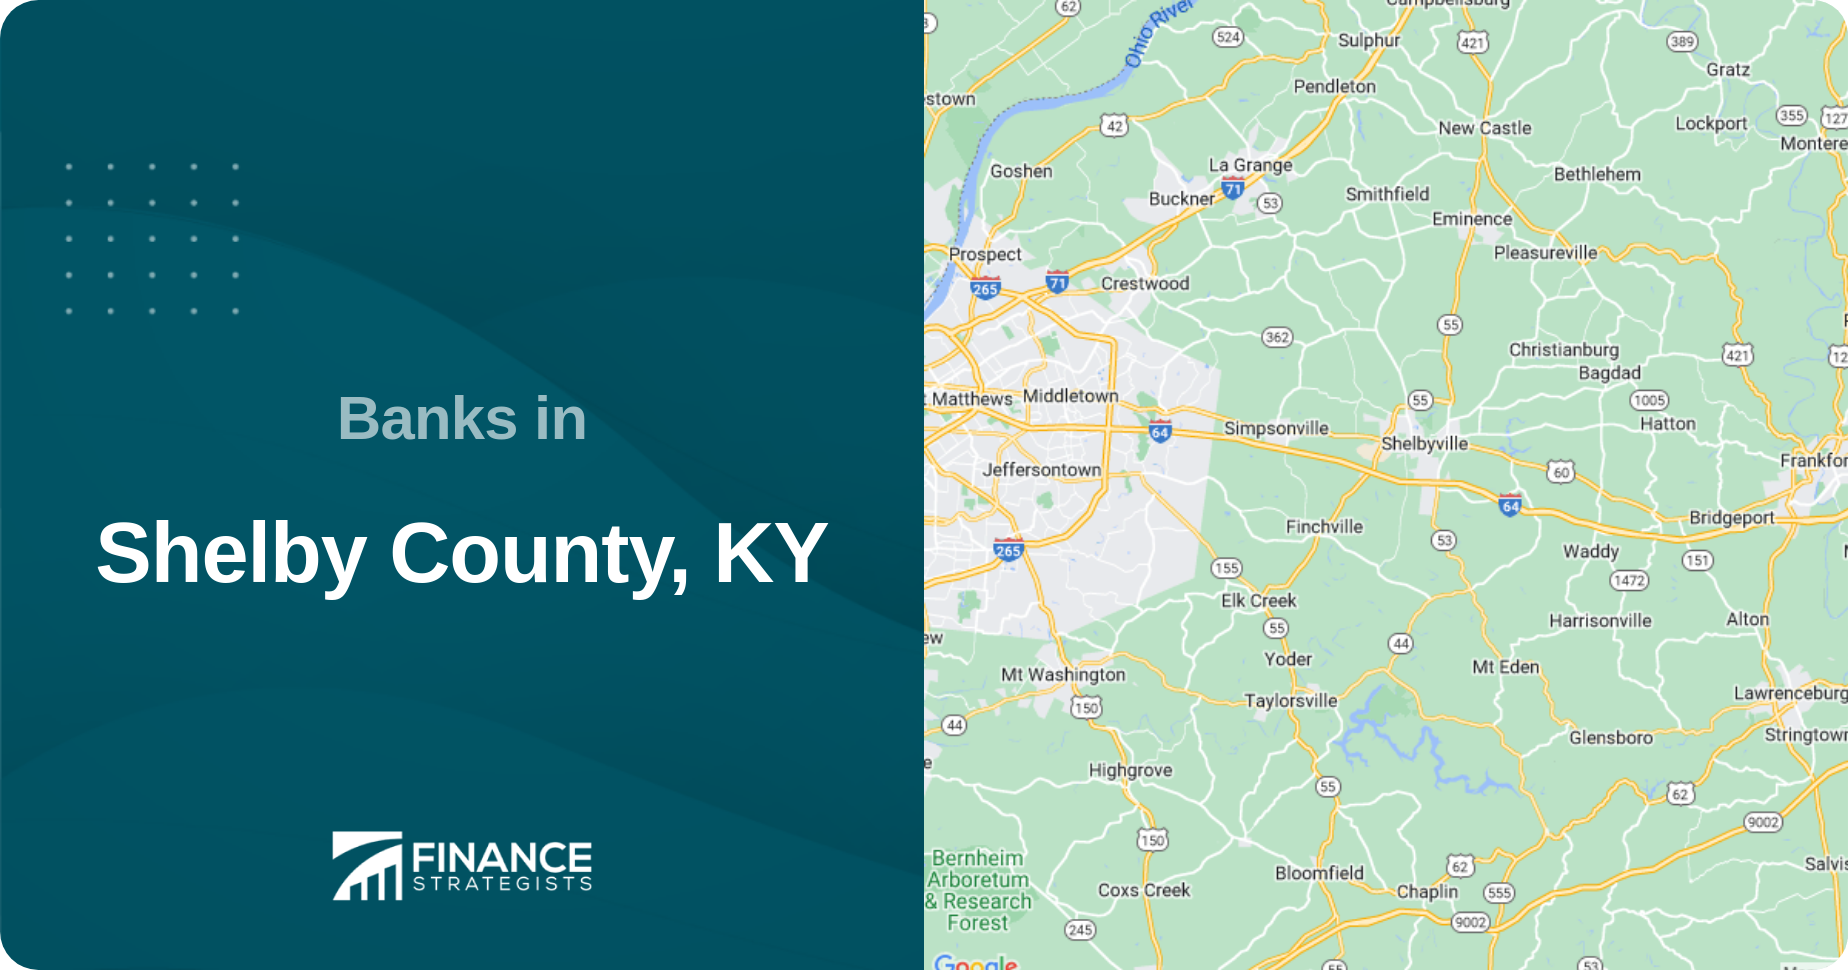 Banks in Shelby County, KY